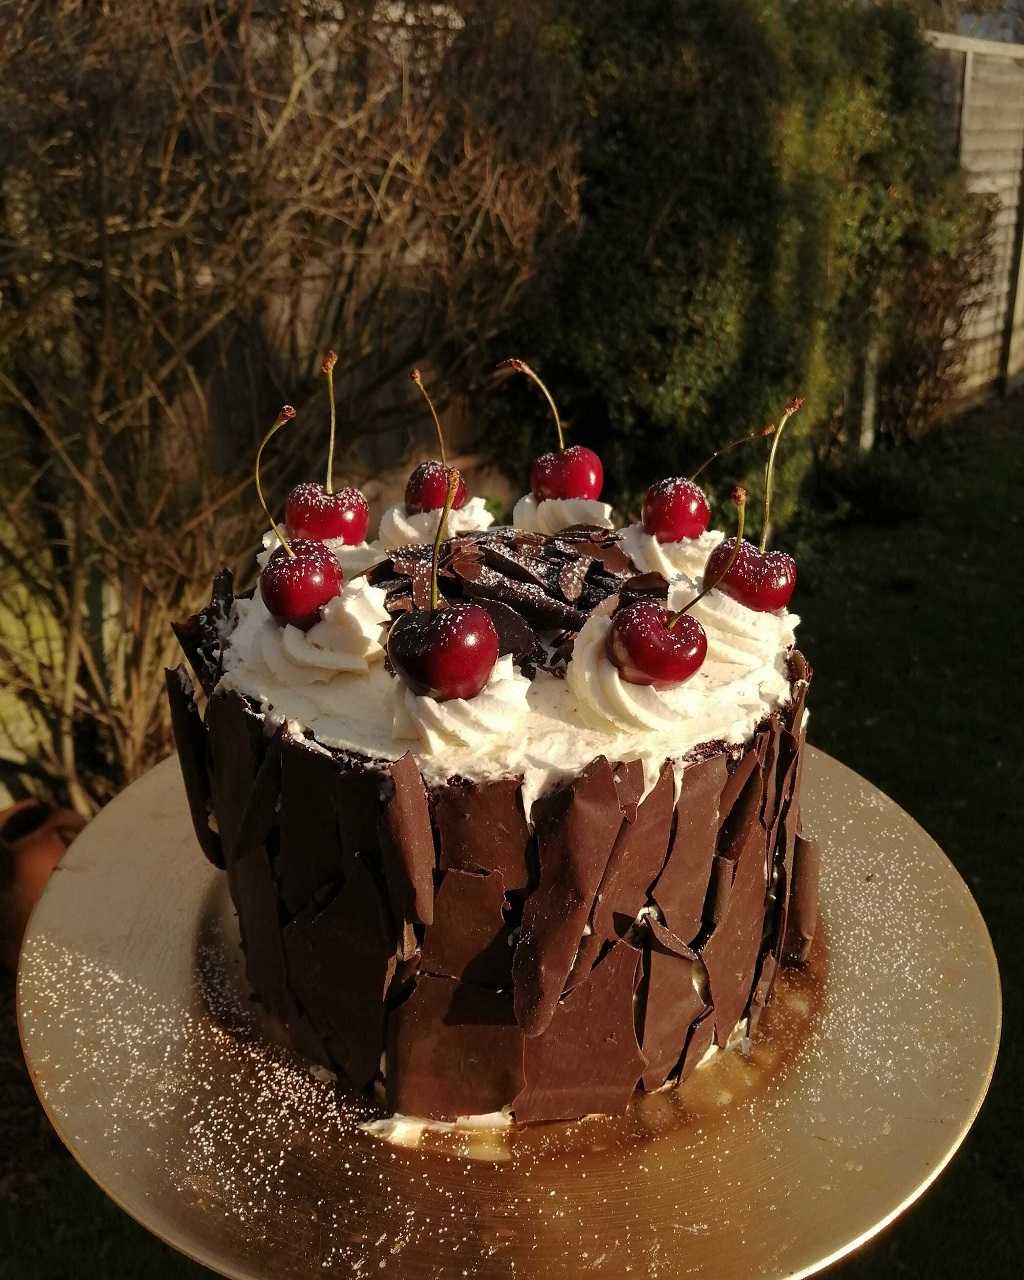 I Made A Black Forest Gateau For Christmas Day Pudding